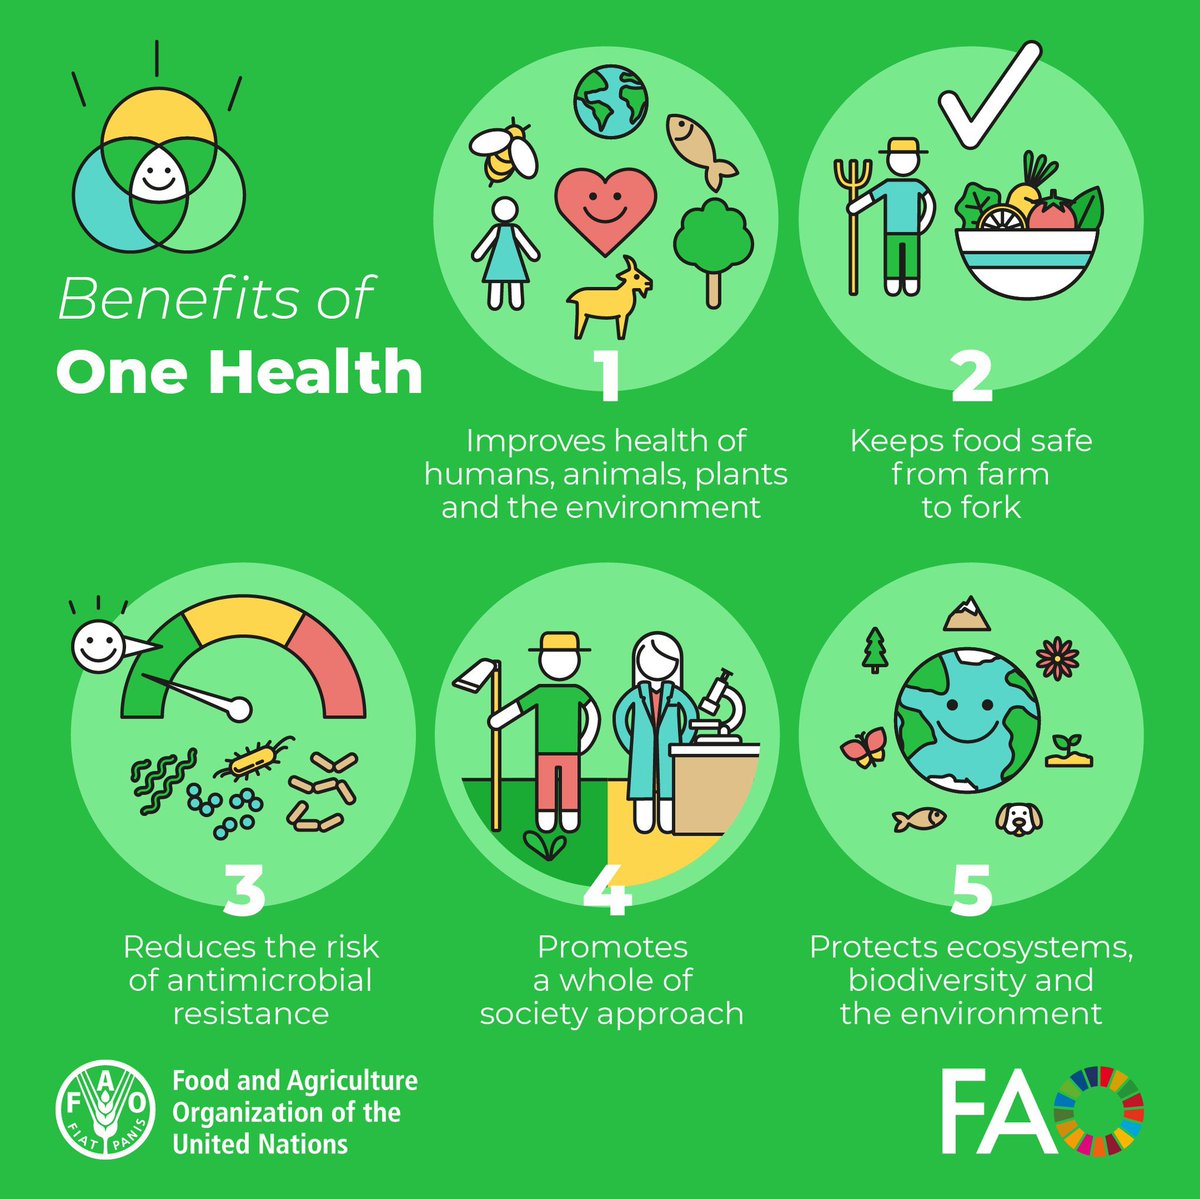 To build a better future for all, we need to address global health issues by collaborating across all sectors. Because human, animal, plant and environmental health are all inextricably linked. Let's work together for #OneHealth! #WorldVeterinaryDay #OneHealth